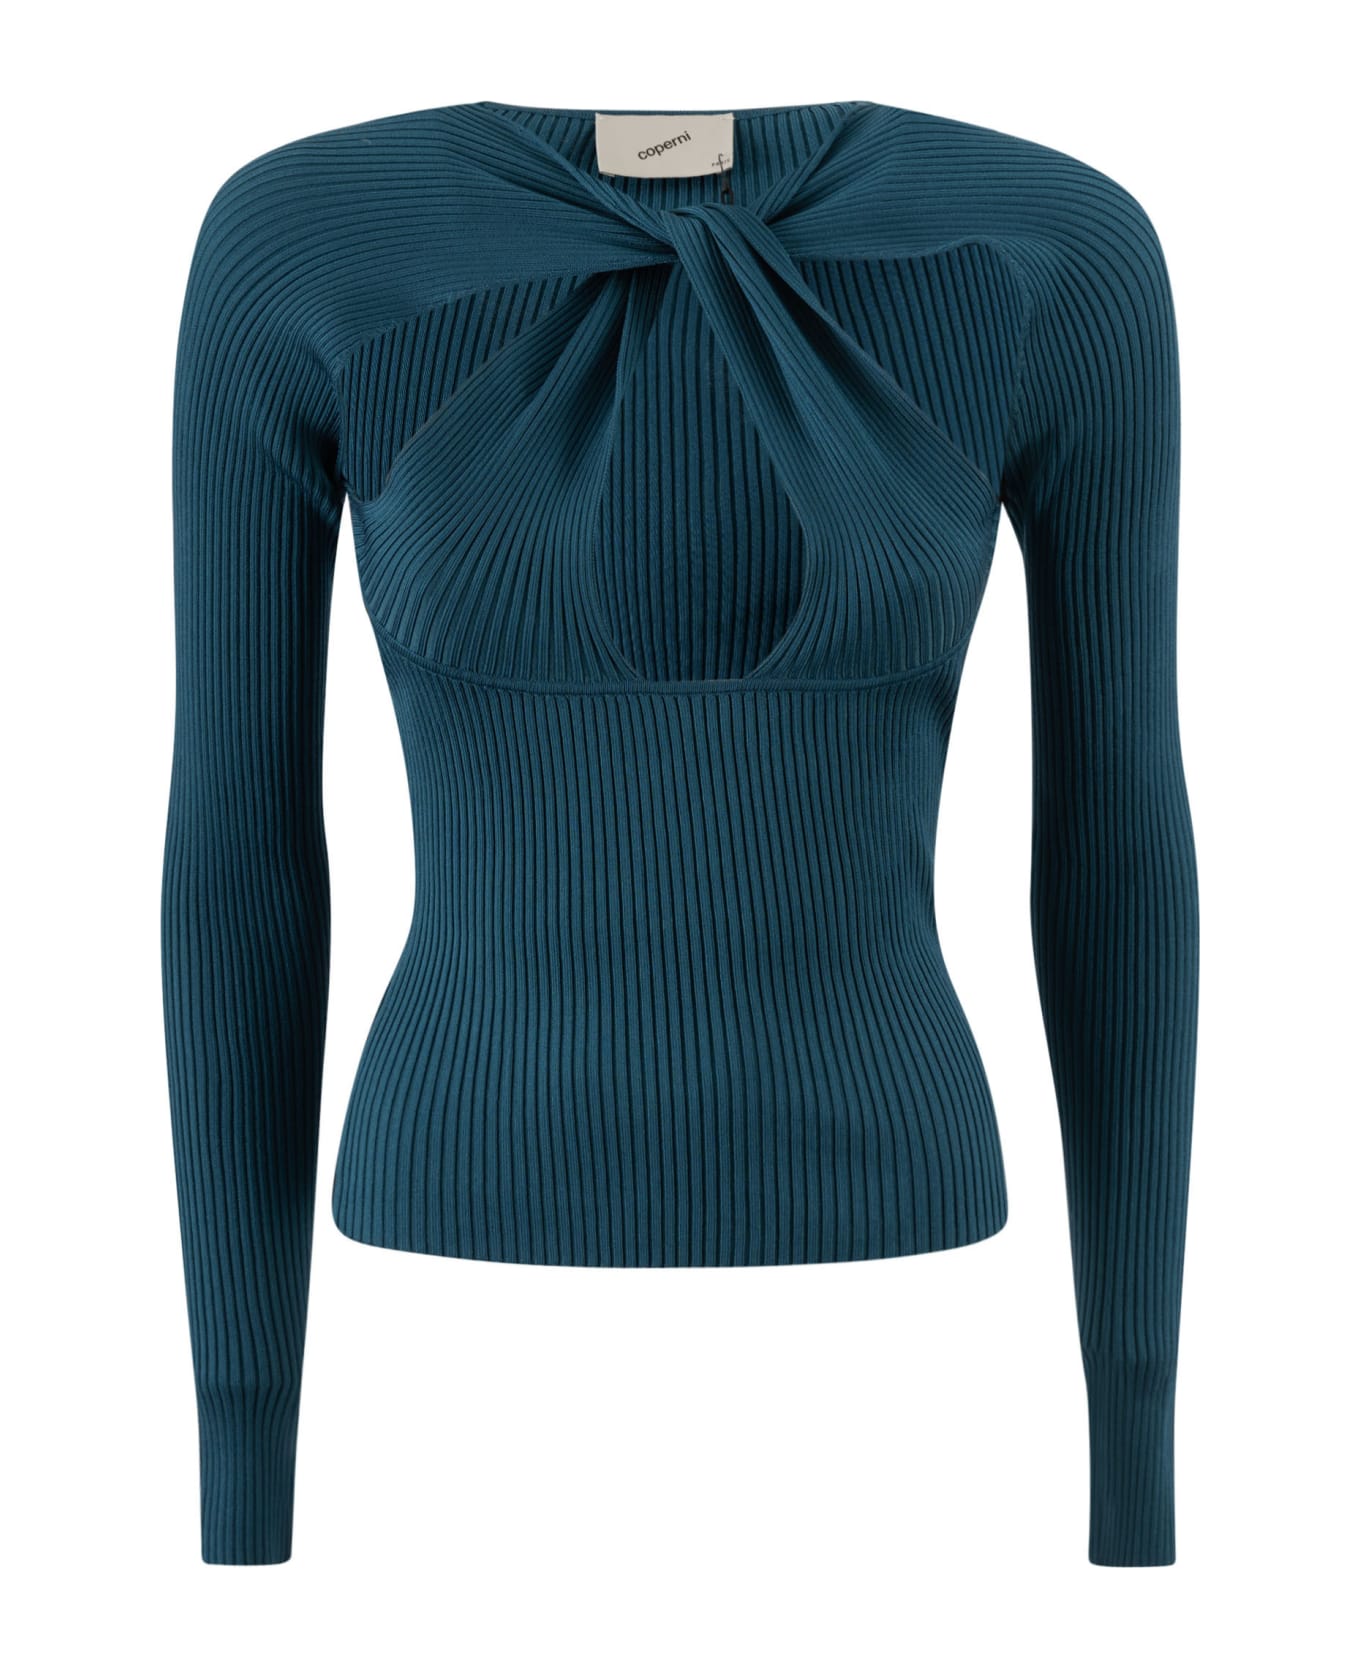 Coperni Twisted Cut-out Knit Top - Peacock